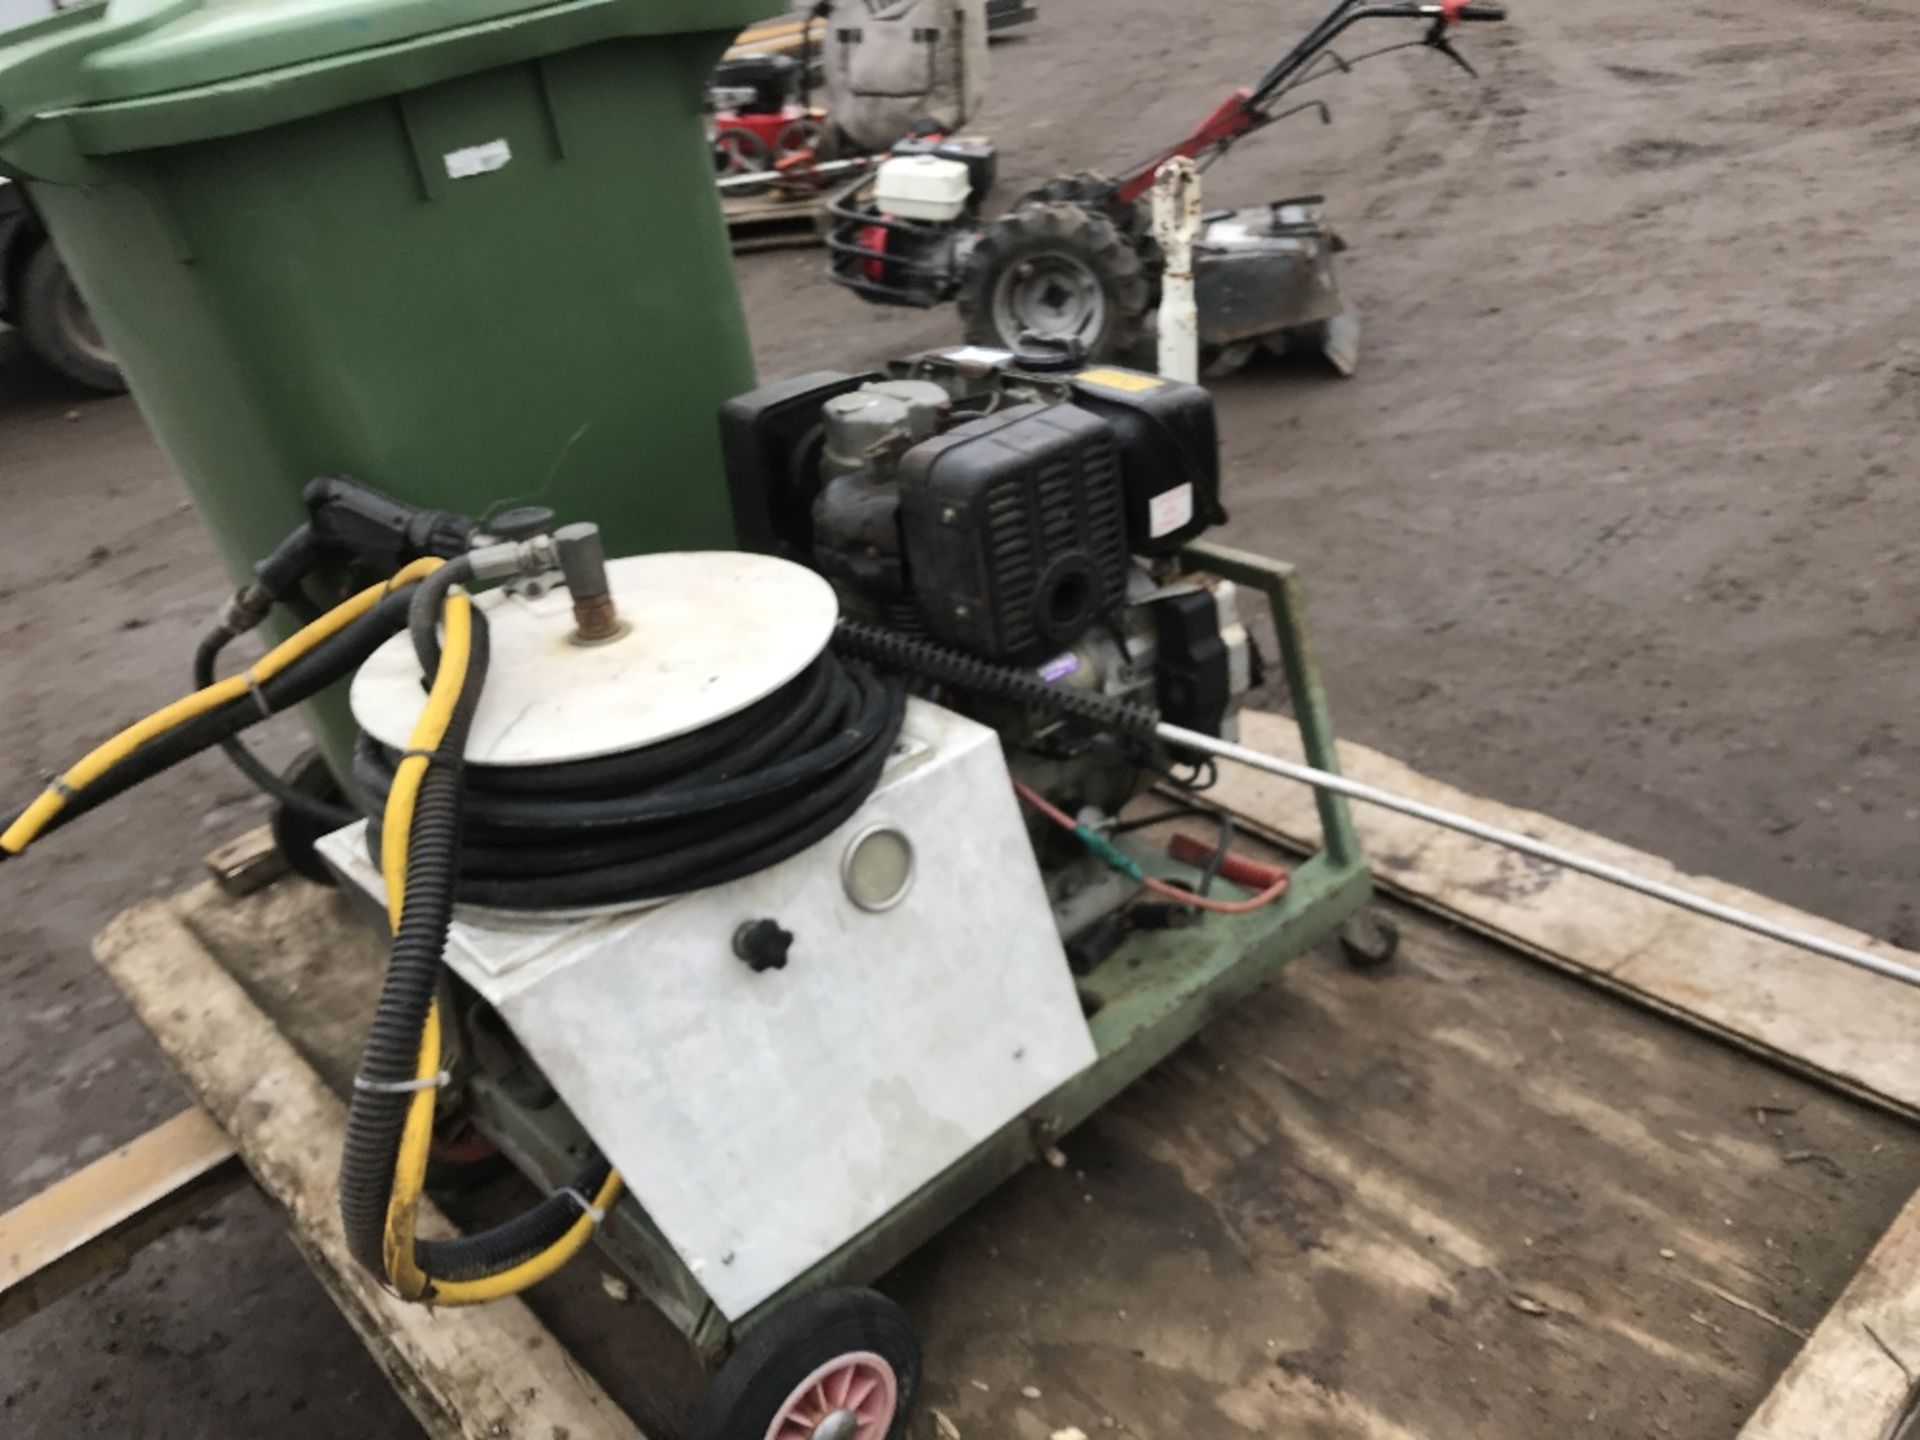 HONDA ENGINED BRENDON DIESEL POWER WASHER C/W HOSE, LANCE AND RESERVOIR TANK. WHEN TESTED WAS SEEN - Image 2 of 5